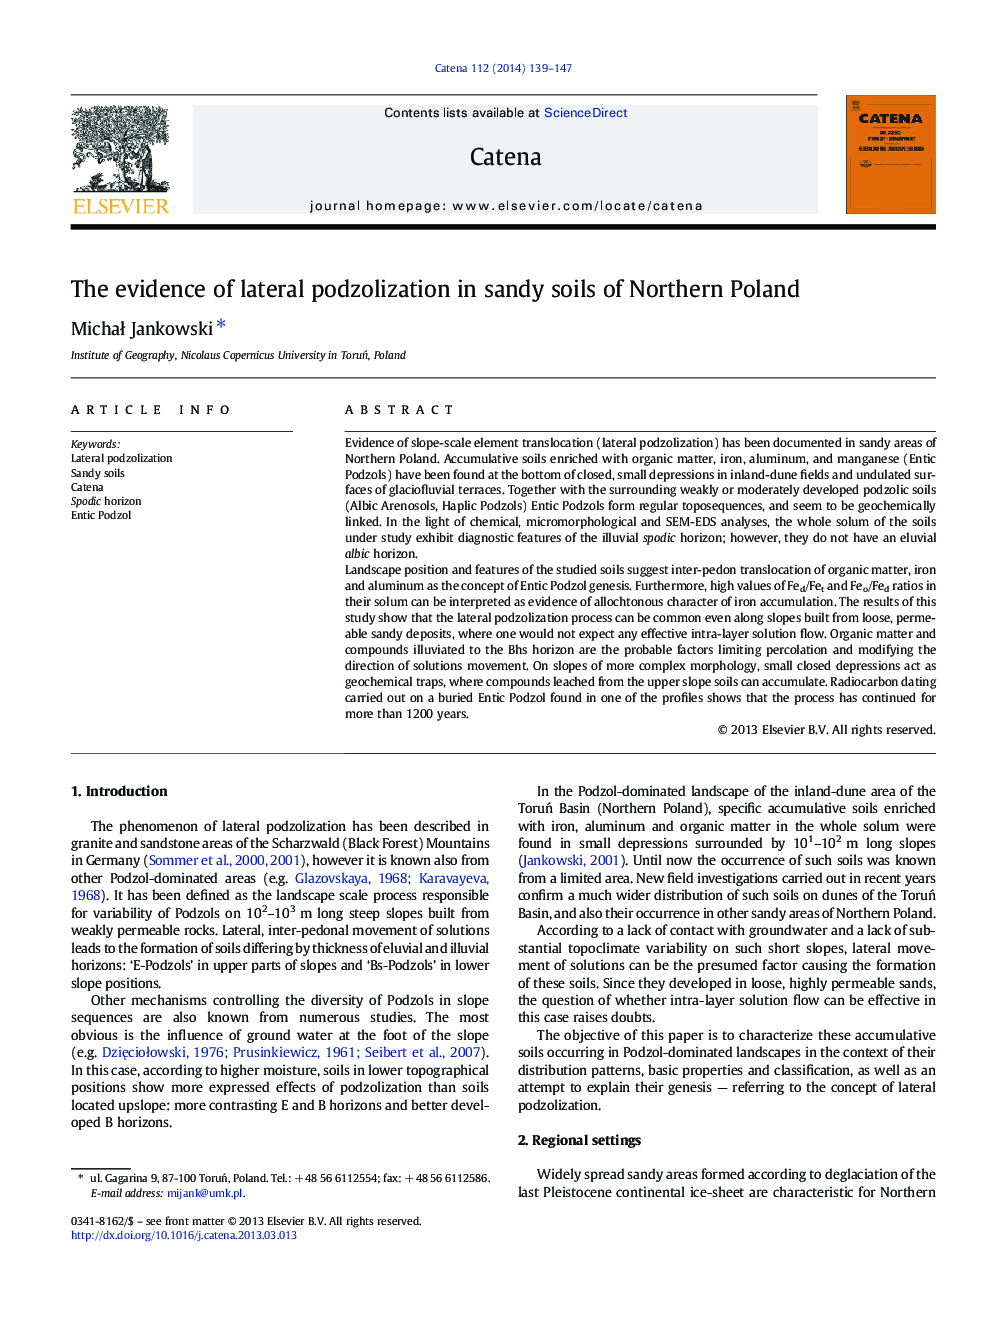 The evidence of lateral podzolization in sandy soils of Northern Poland